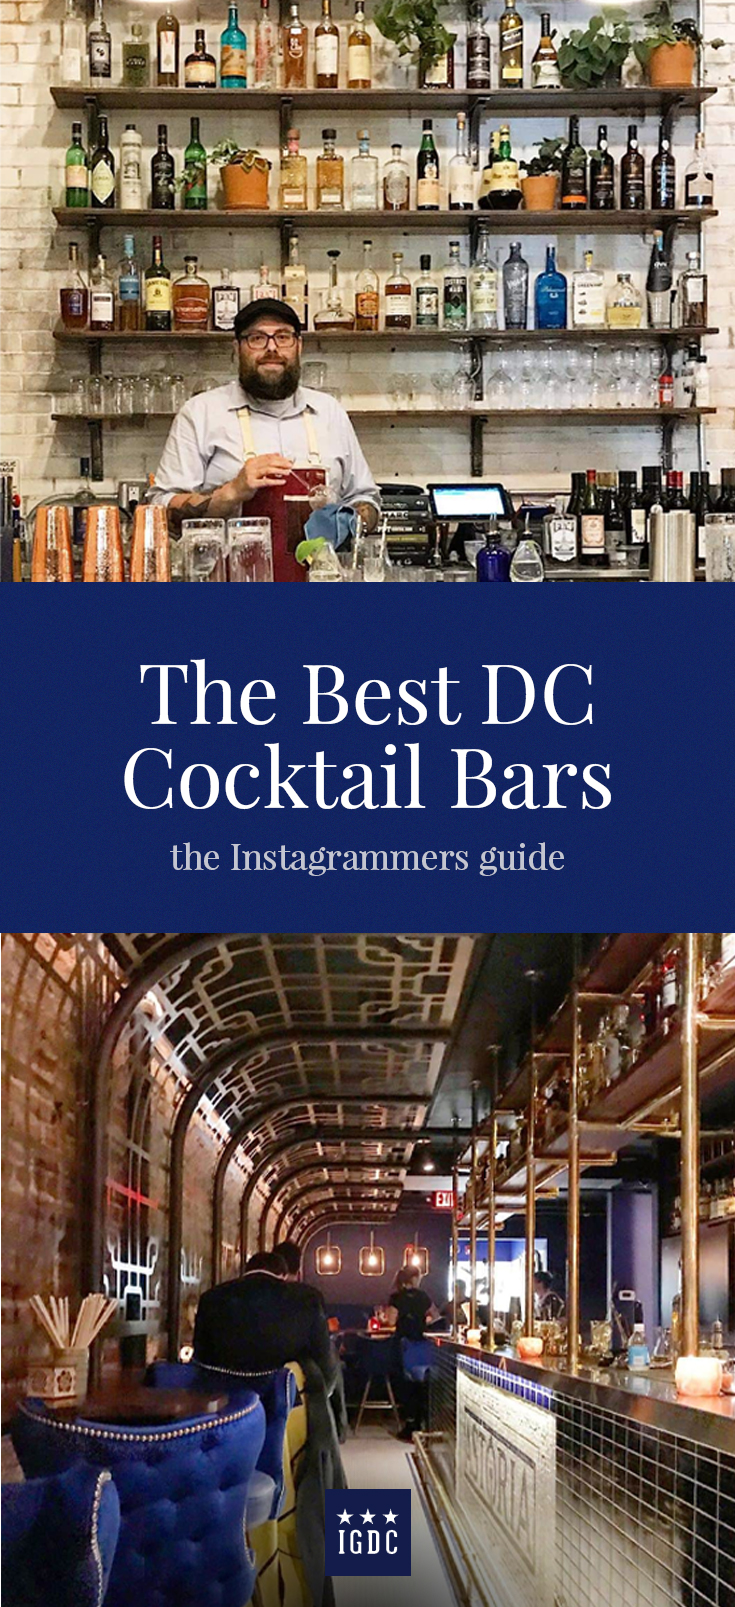 The 10 Best Cocktail Bars in DC the Instagrammers Guide